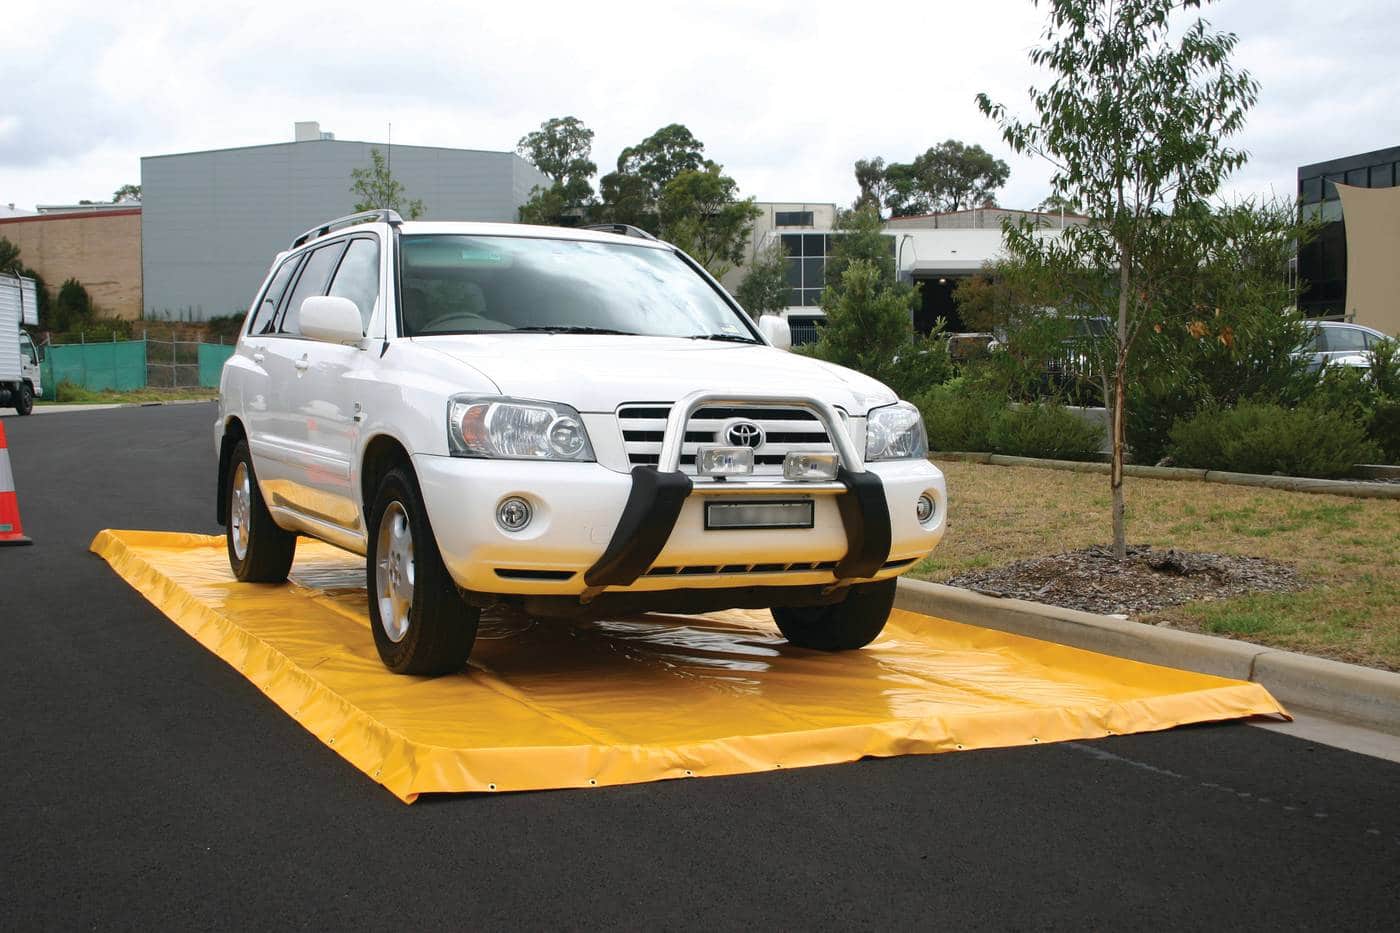 Chatoyer Vehicle Wash Mat with Car